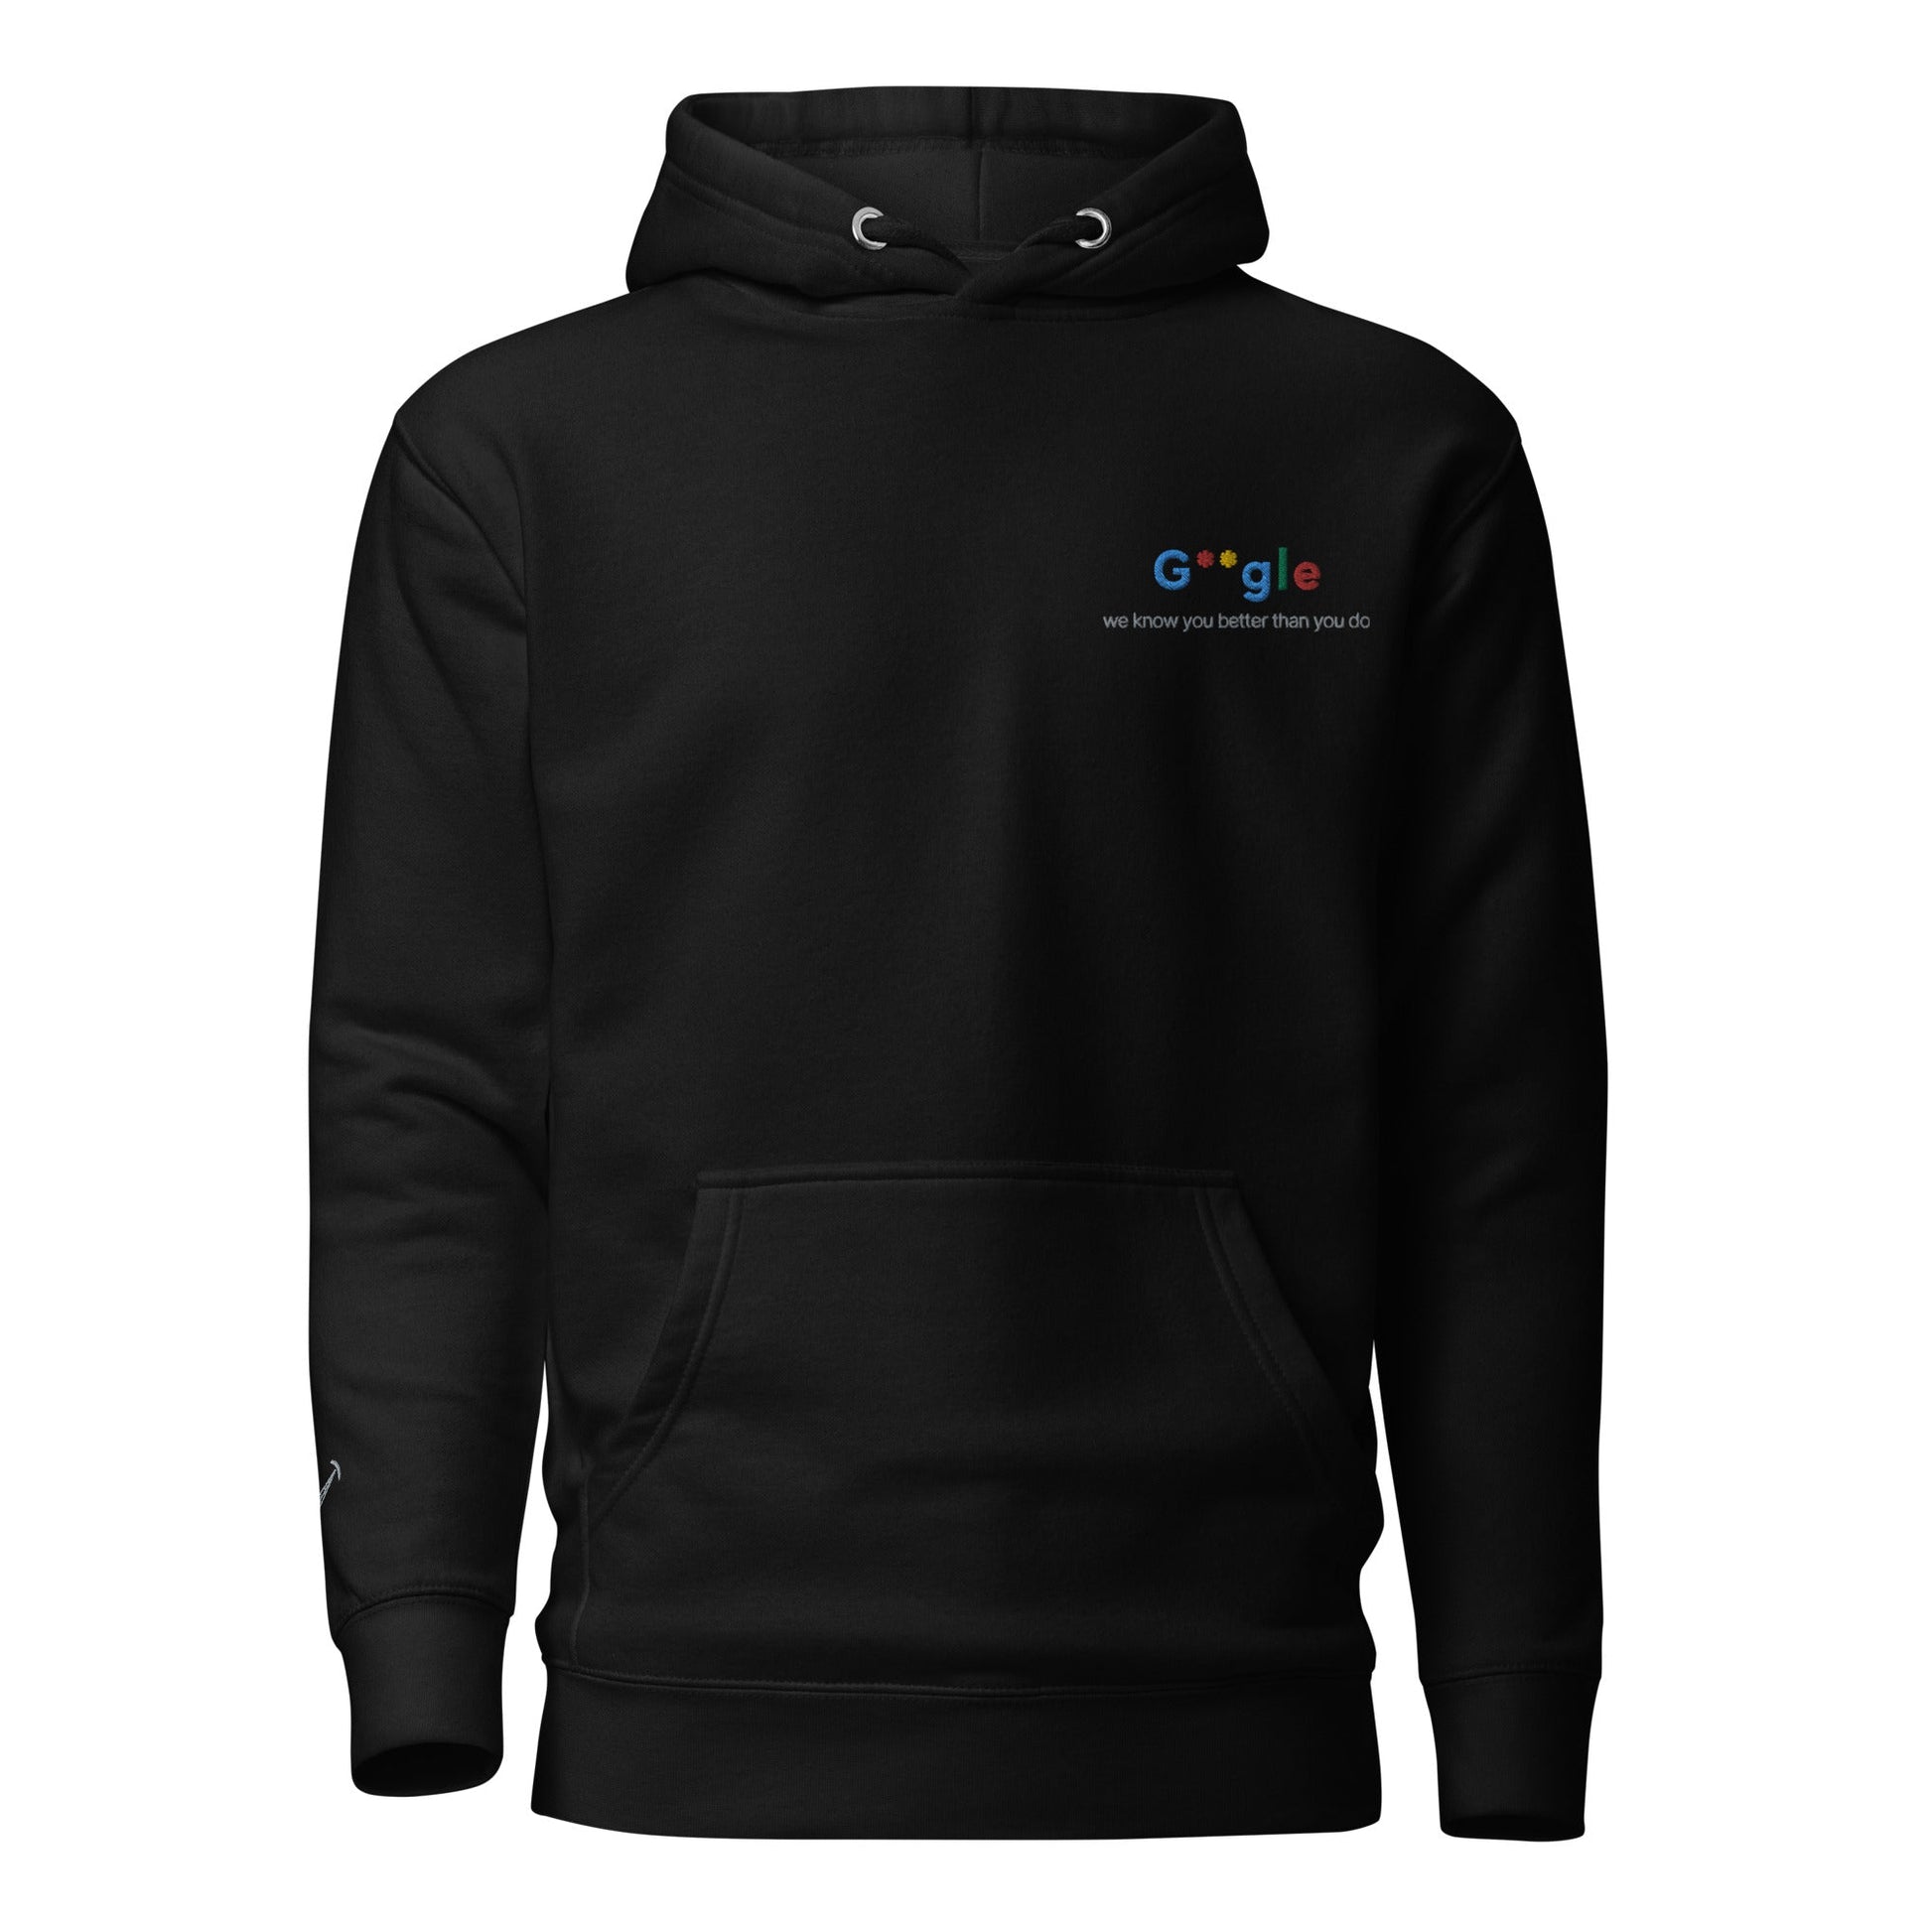 Go*gle Embroidered Unisex Hoodie - chucklecouture co.